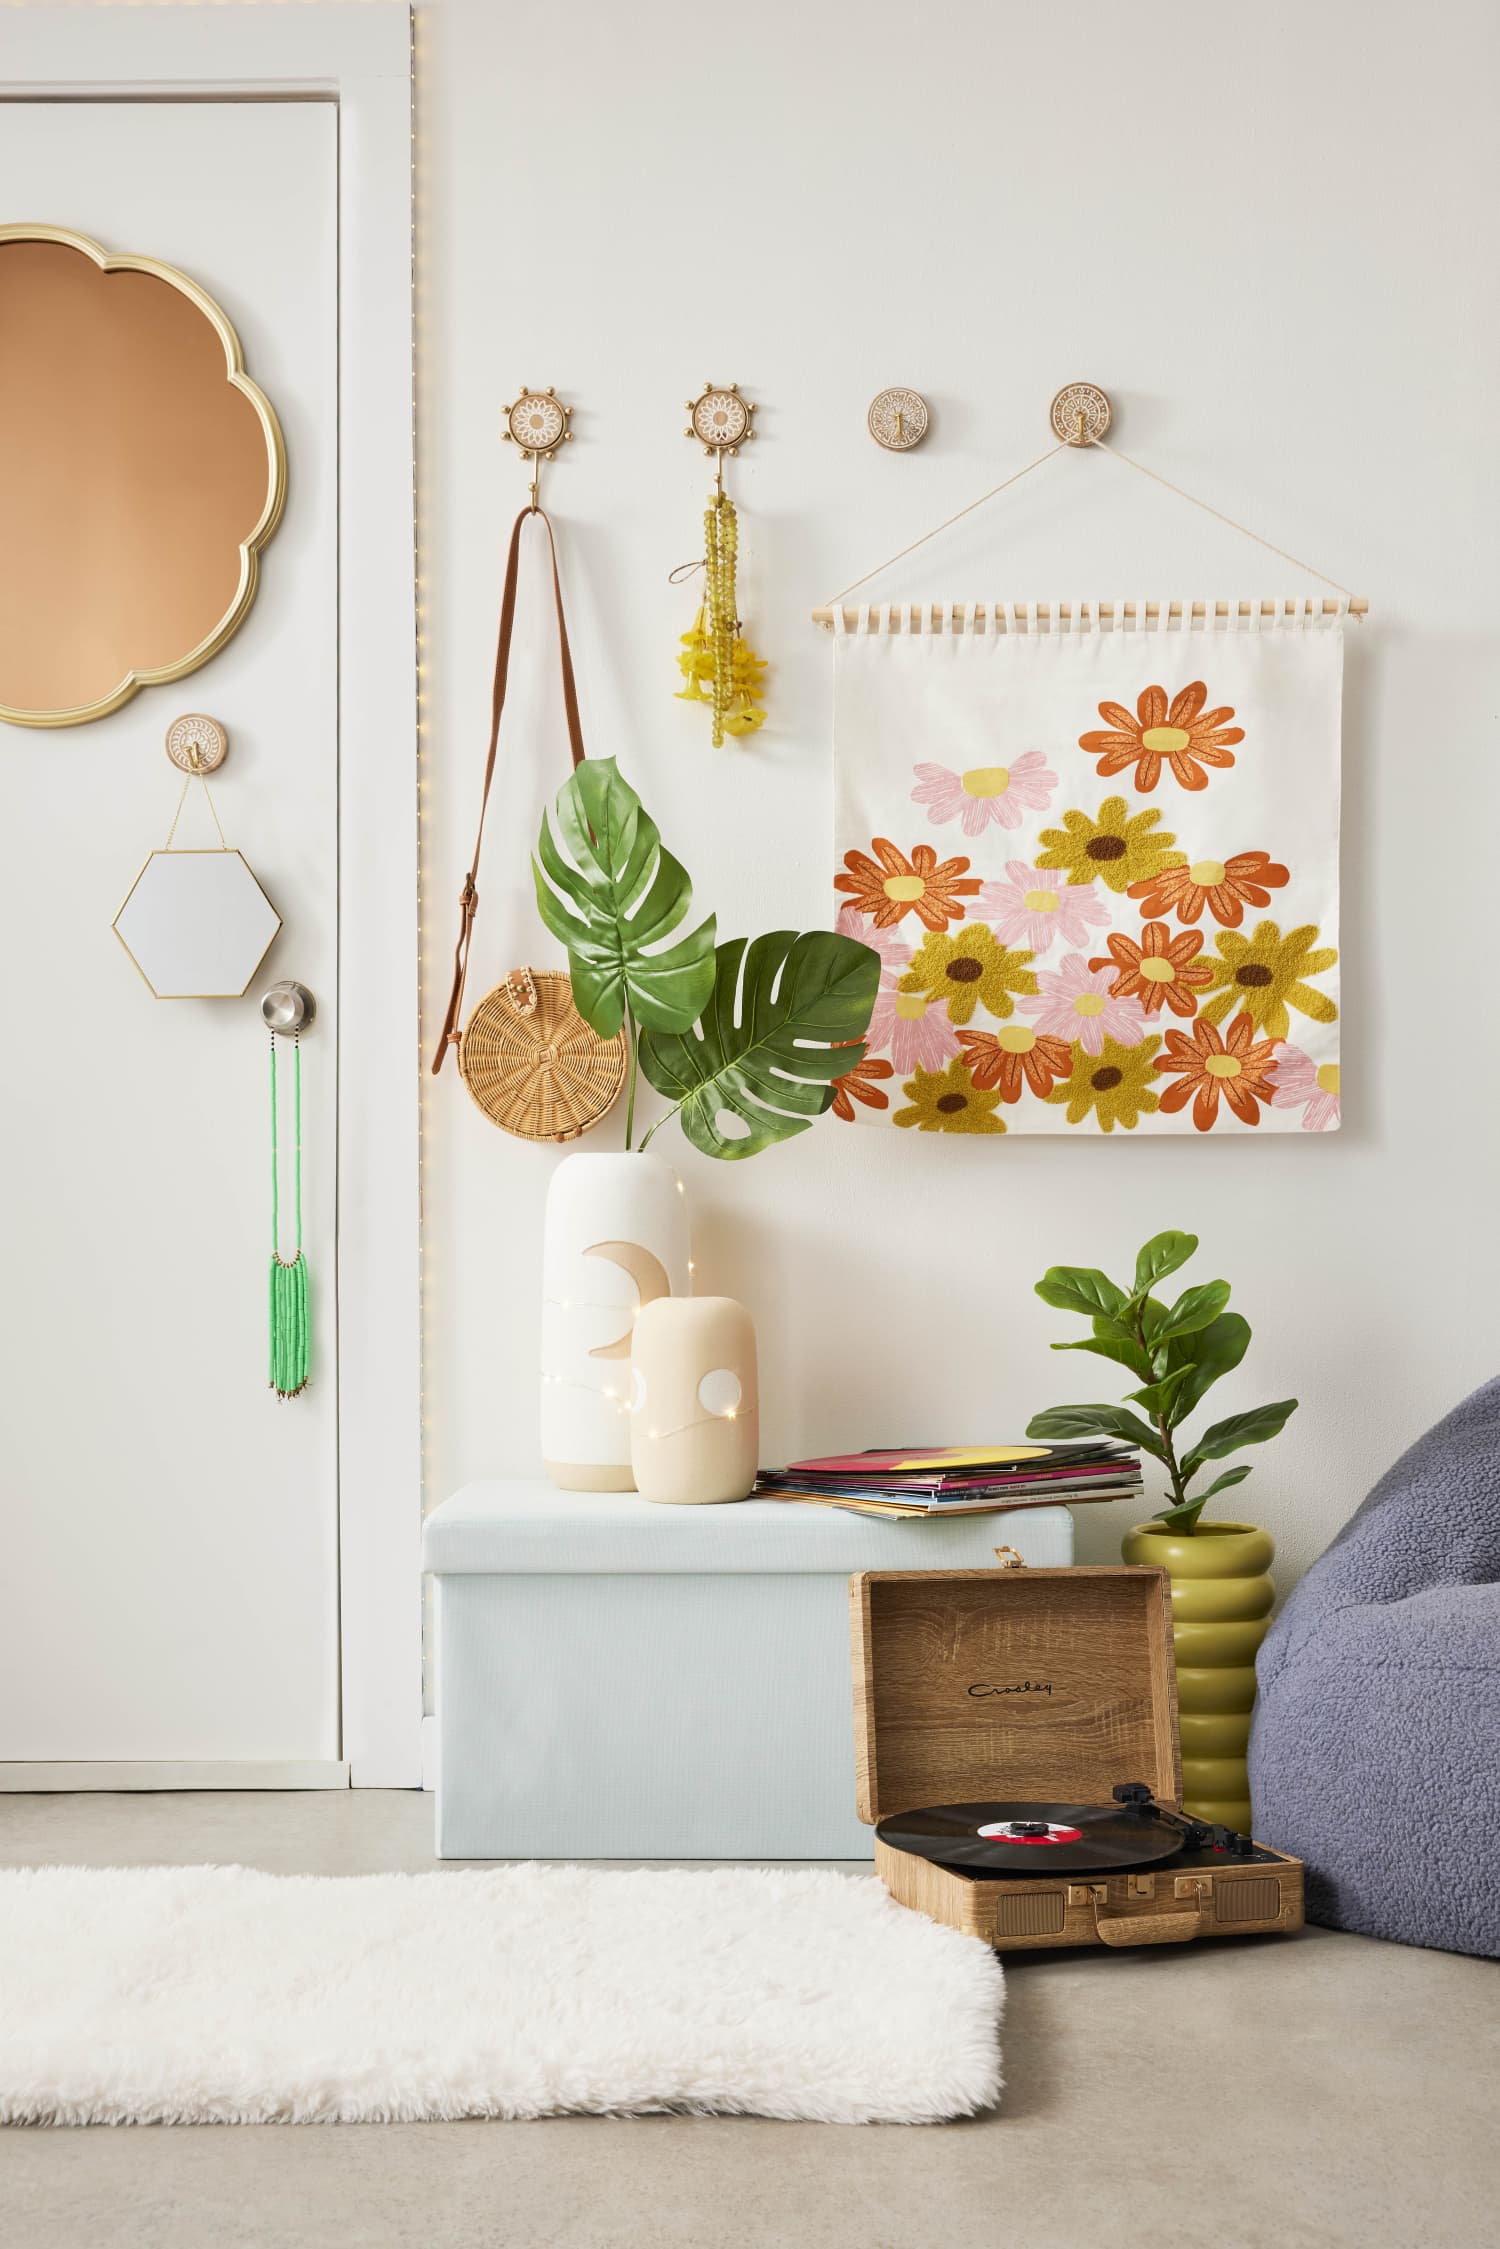 10 Stylish Decor Swaps to Take Your First Apartment to the Next Level